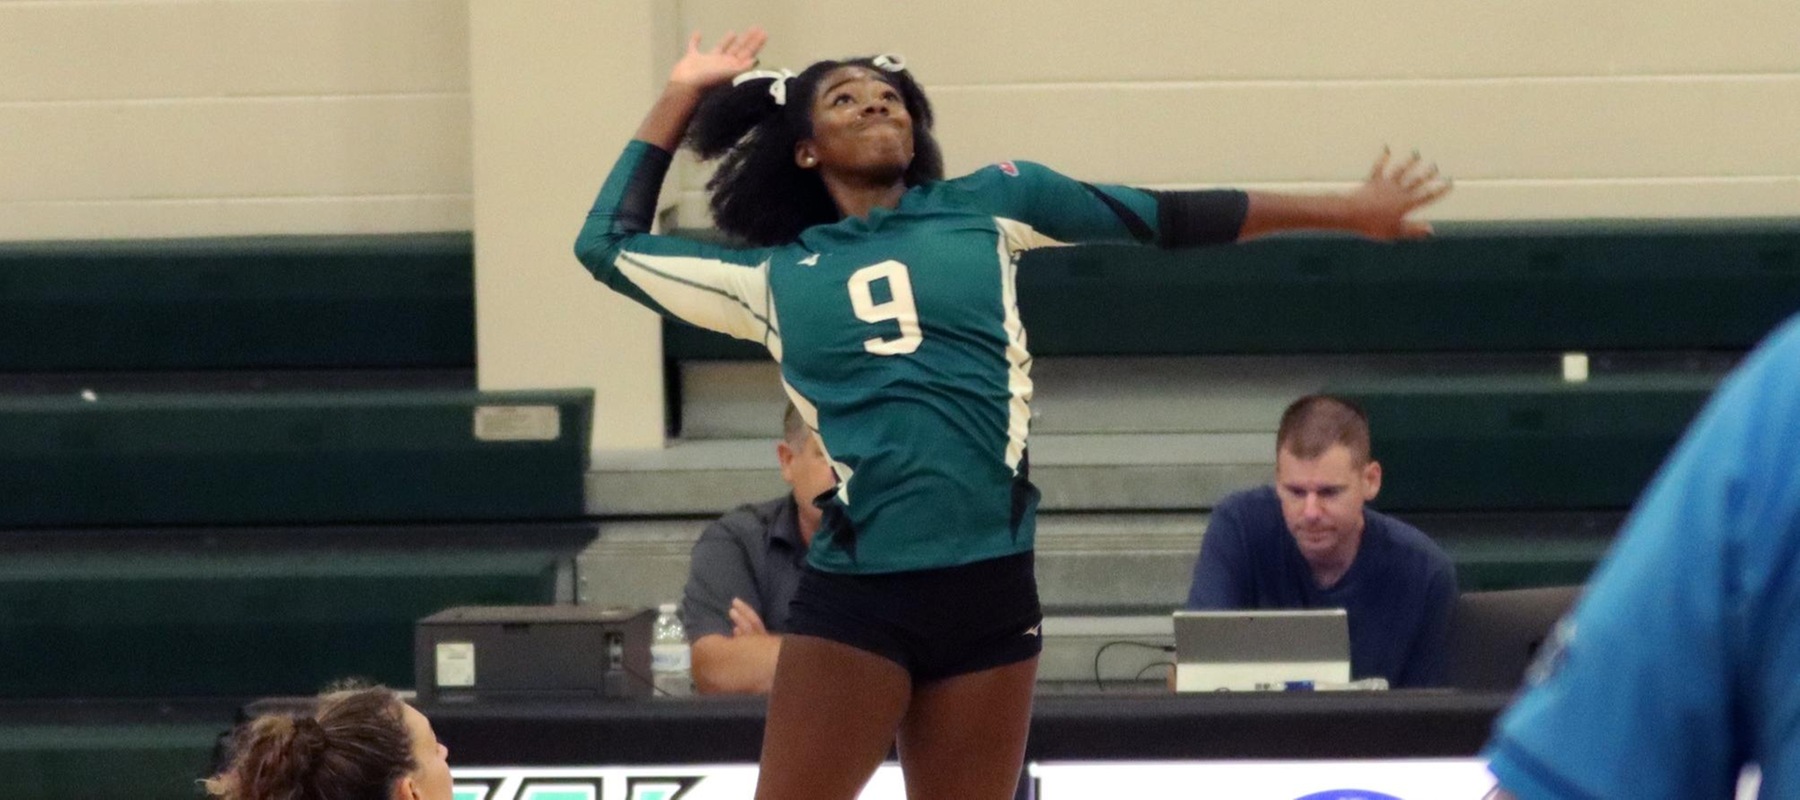 File photo of Cailyn Smiley who had 14 kills against Adelphi and 10 kills against Daemen on Friday. Copyright 2023; Wilmington University. All rights reserved. Photo by Dan Lauletta. September 9, 2023 vs. Molloy.